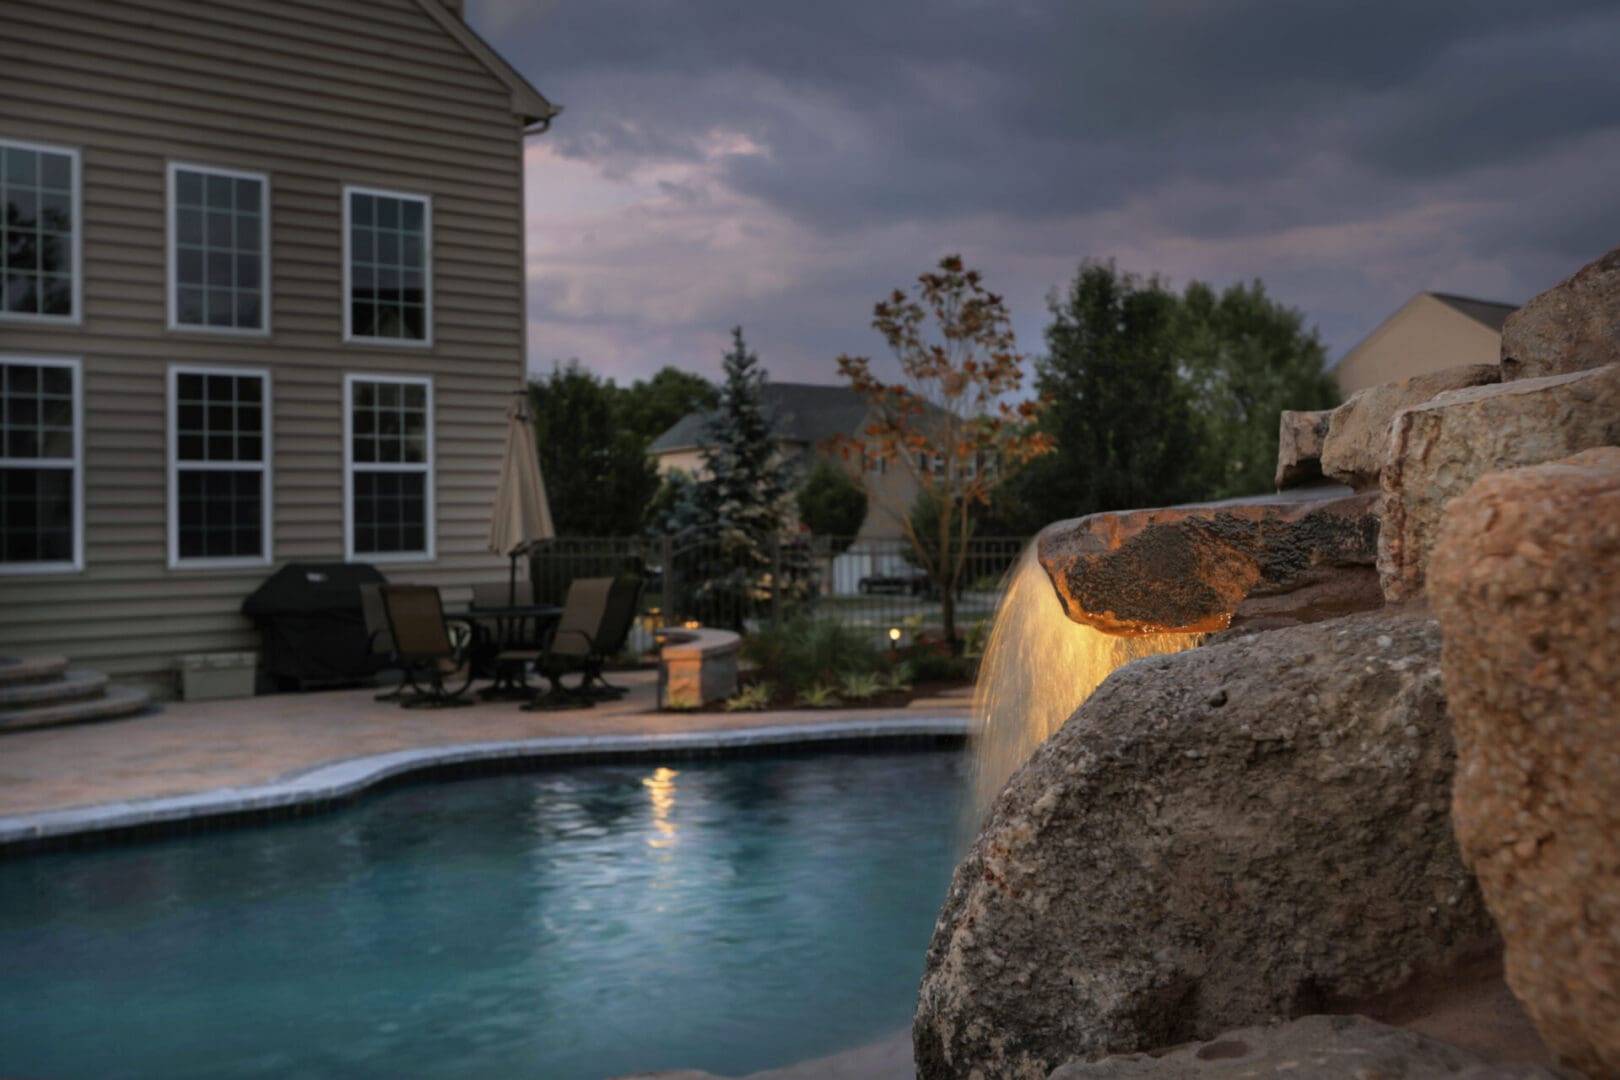 A pool with a waterfall and outdoor lighting in the background.